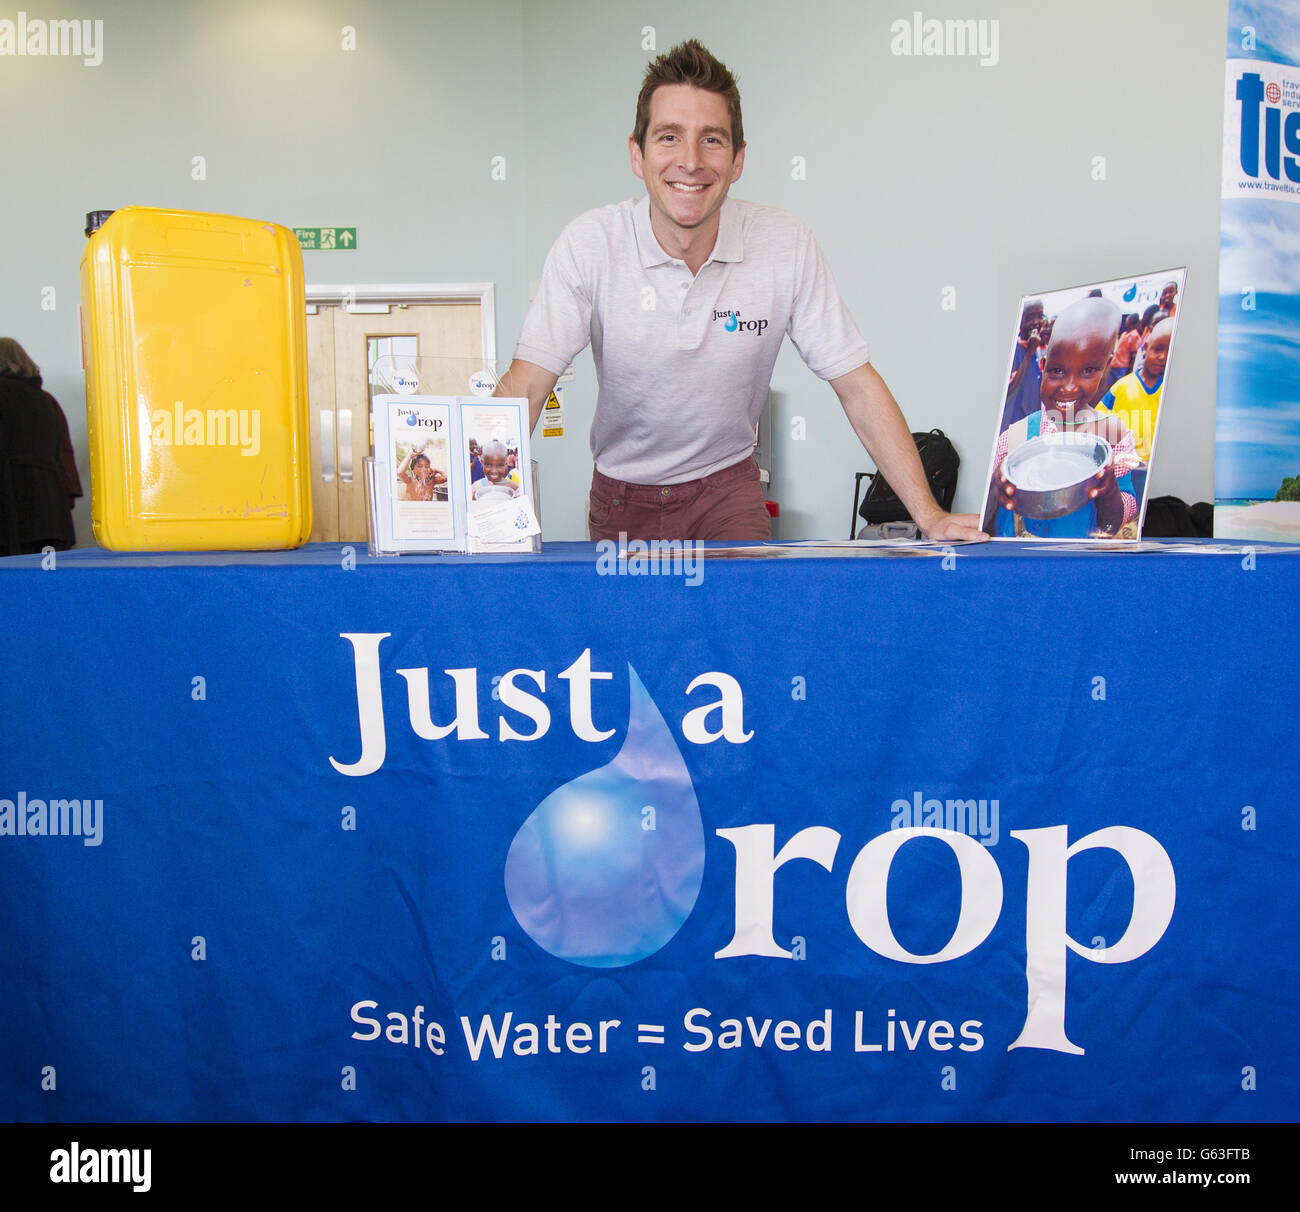 Chris Cook, Just a Drop charity School Ambassador and former Olympic swimmer at the City Cruise Terminal in Southampton before boarding Norwegian Cruise Line's new ship, the 146,600 tonne Norwegian Breakaway. Stock Photo